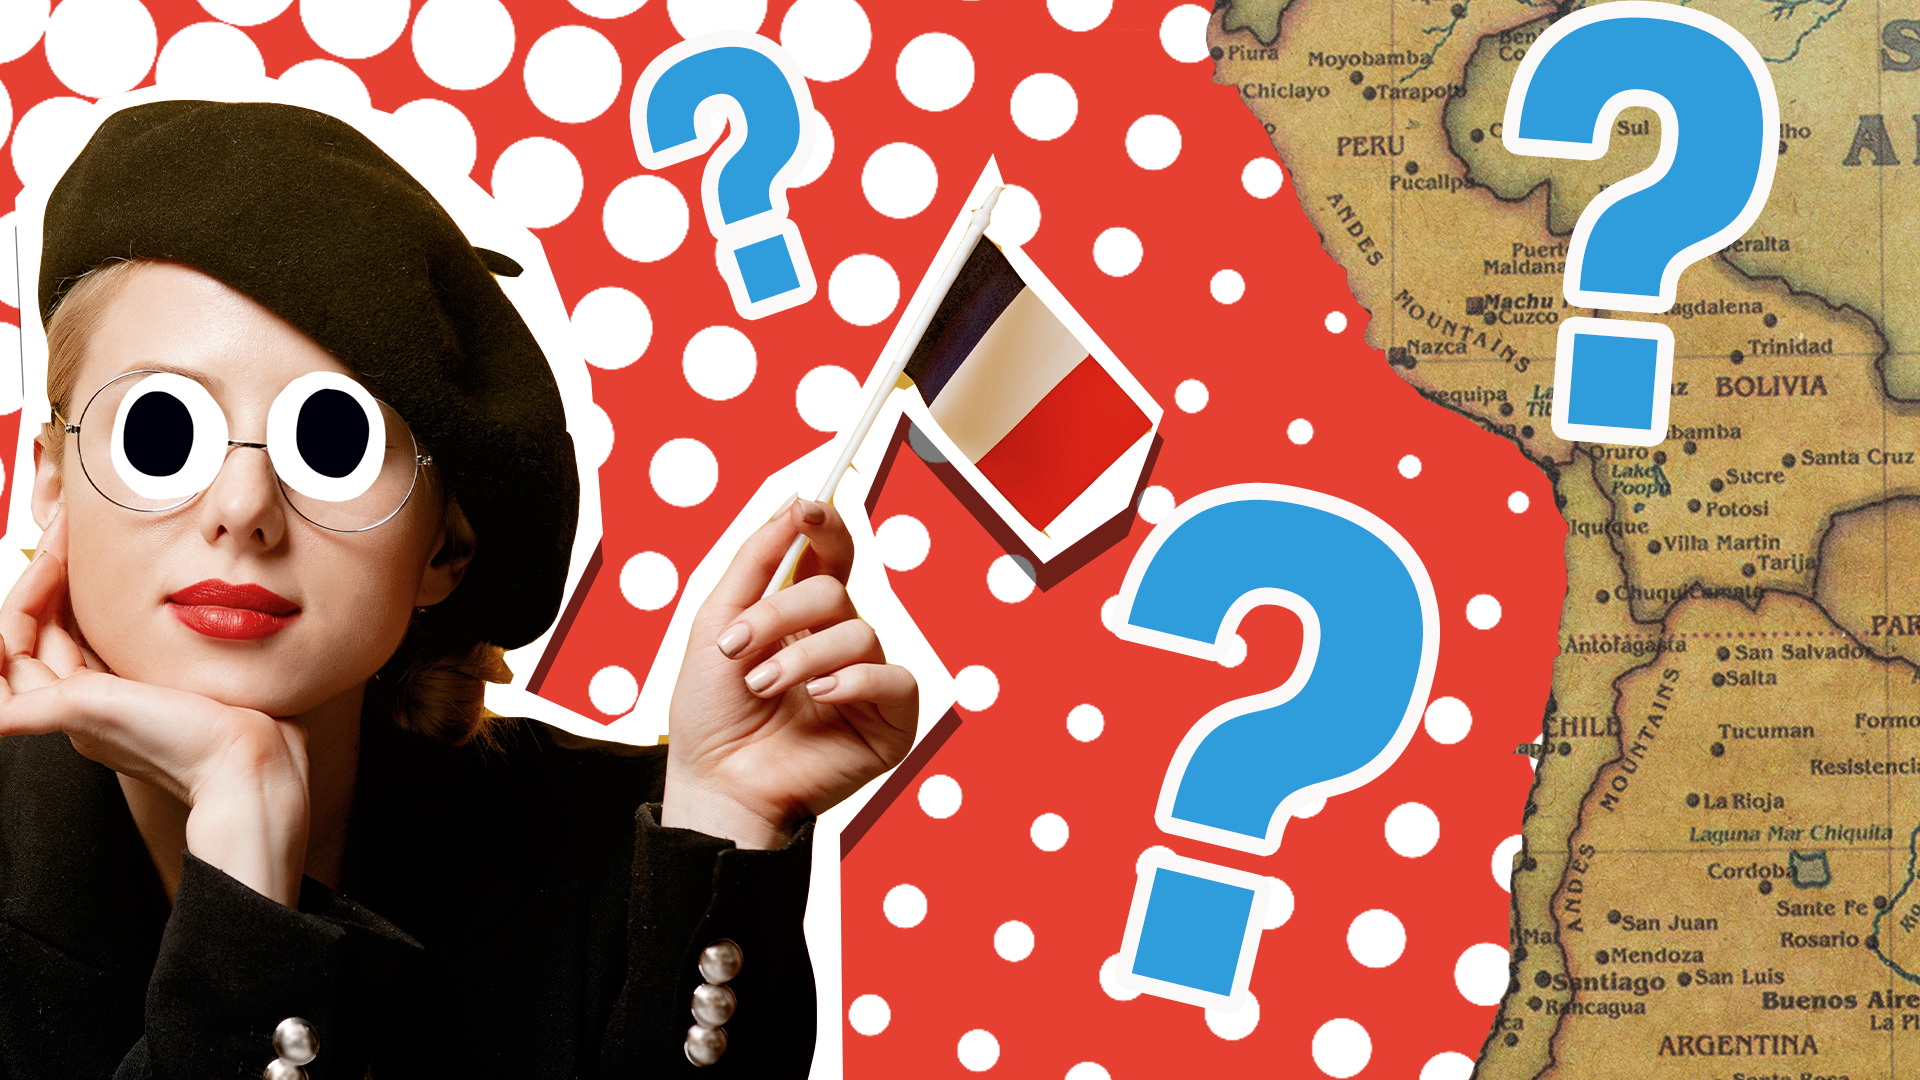 Which country are you thumbnail